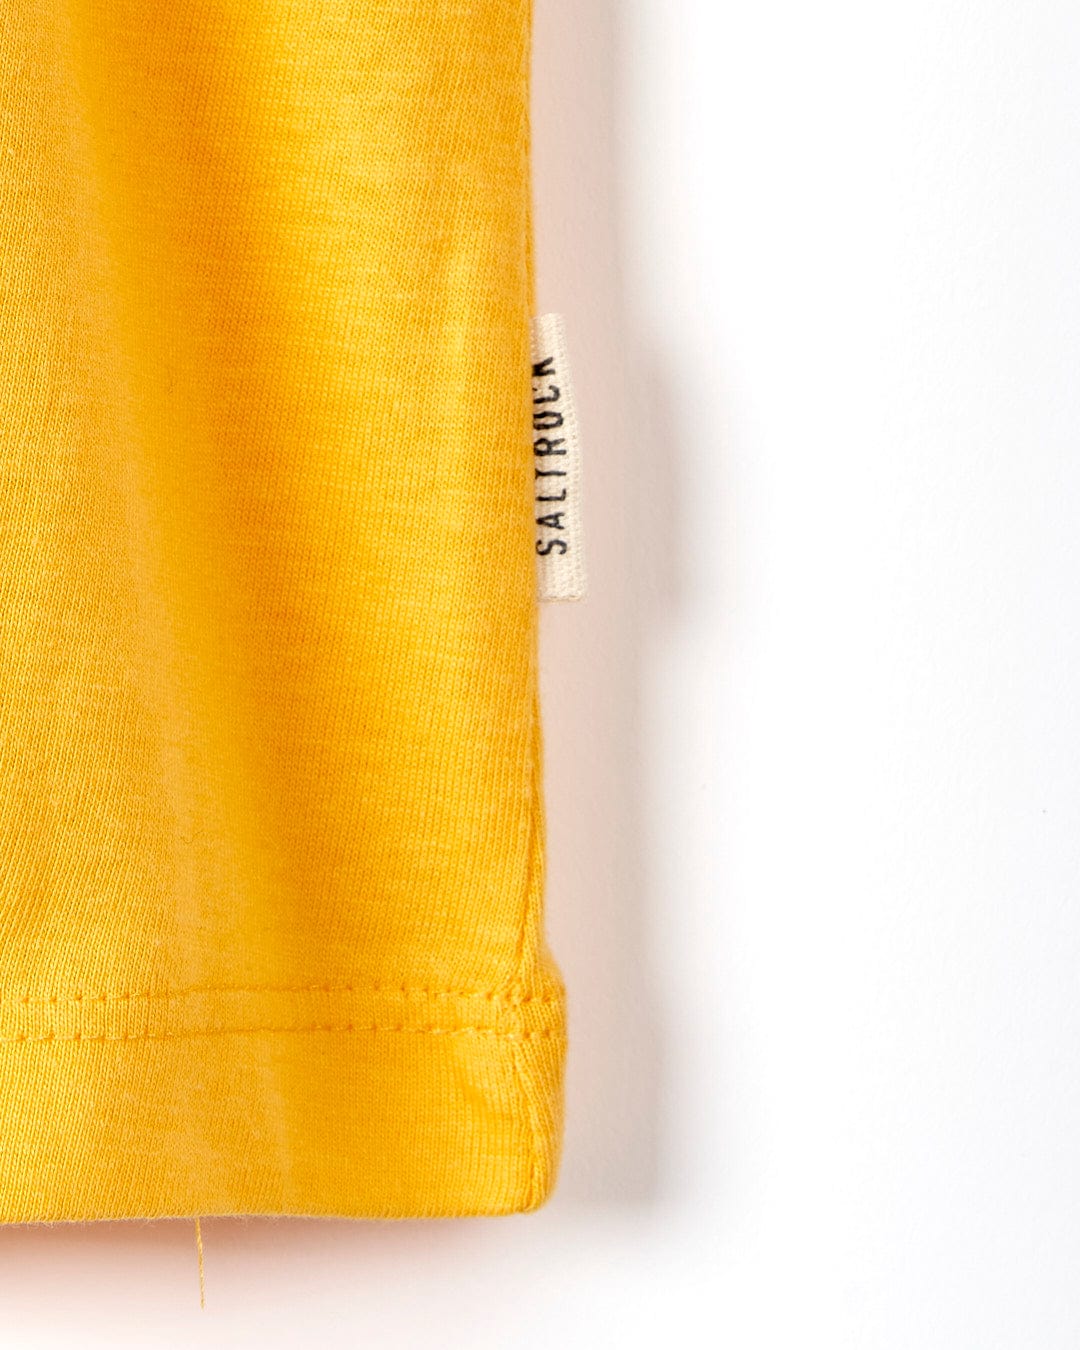 A Saltrock yellow t-shirt with the On The Road - Womens Short Sleeve T-Shirt - Yellow label on it.